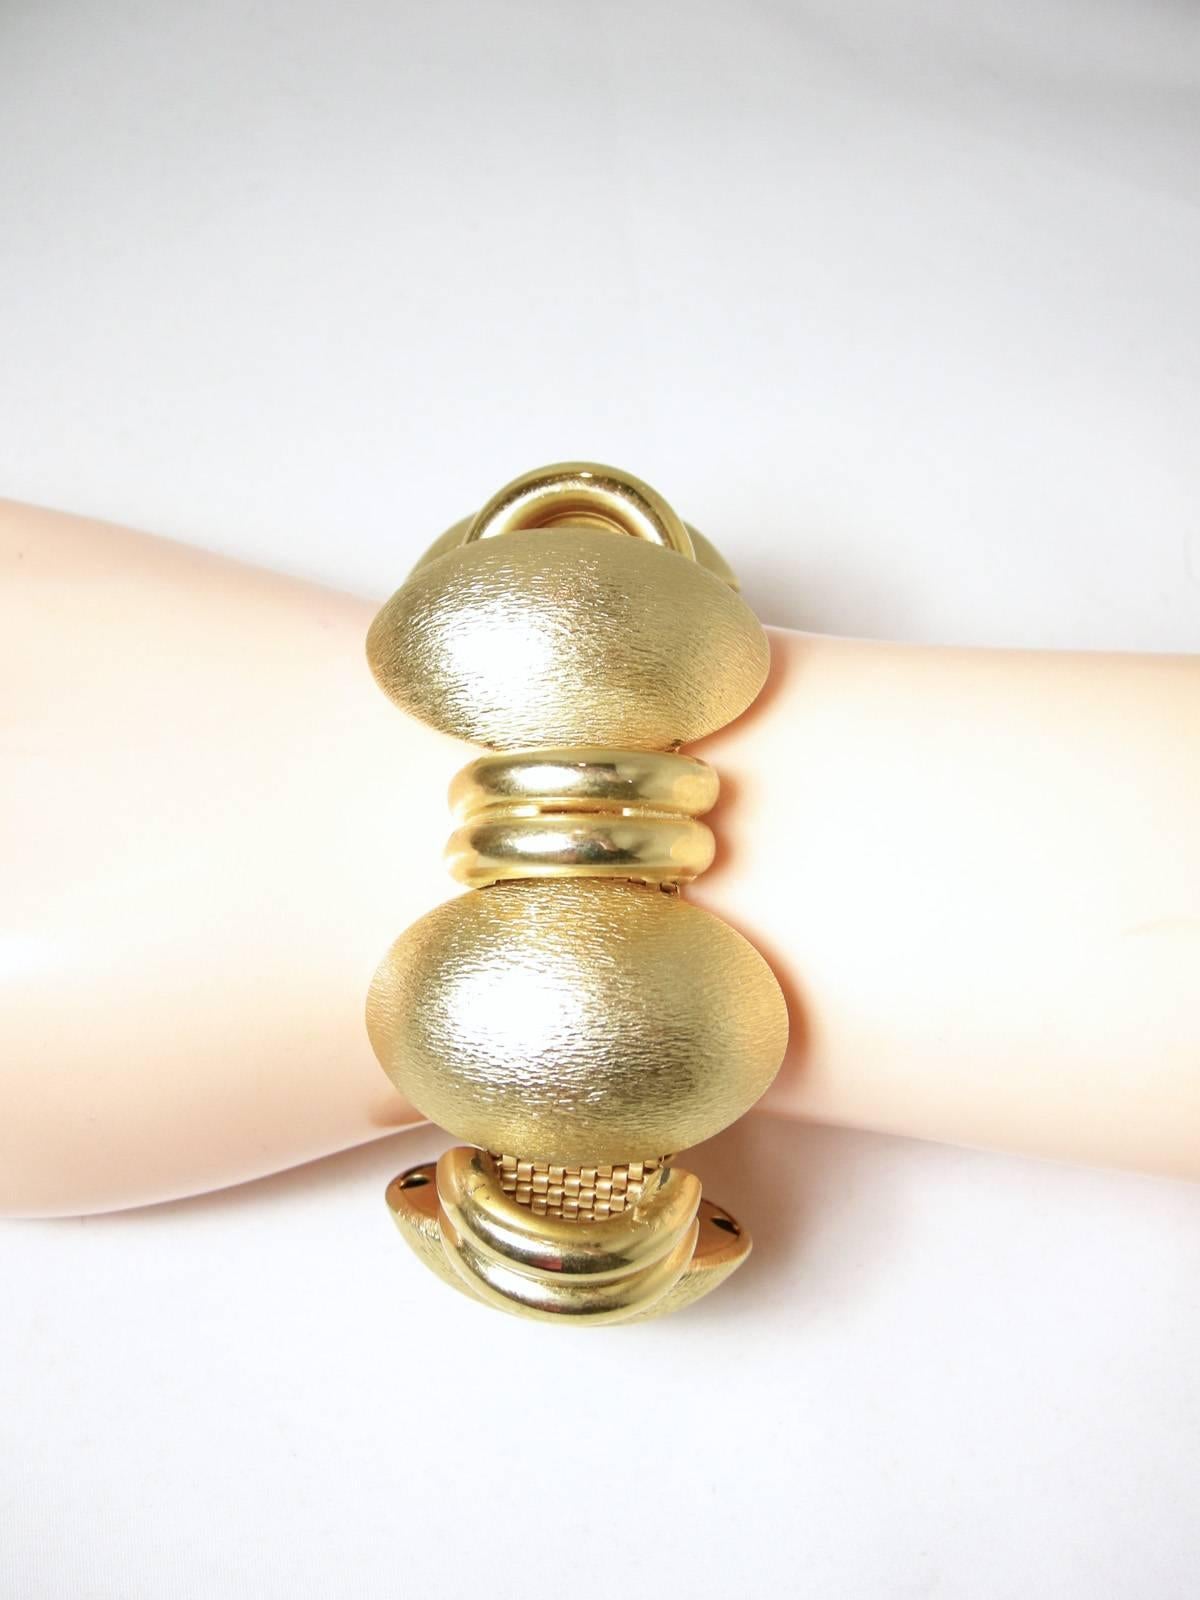 This is a big and bold stylish dome statement bracelet with an alternating design.  The bracelet has a mesh-like backing. It is set in a gold tone setting with a Florentine finish design. The bracelet measures 7-1/4” x 1-1/2” and is in excellent